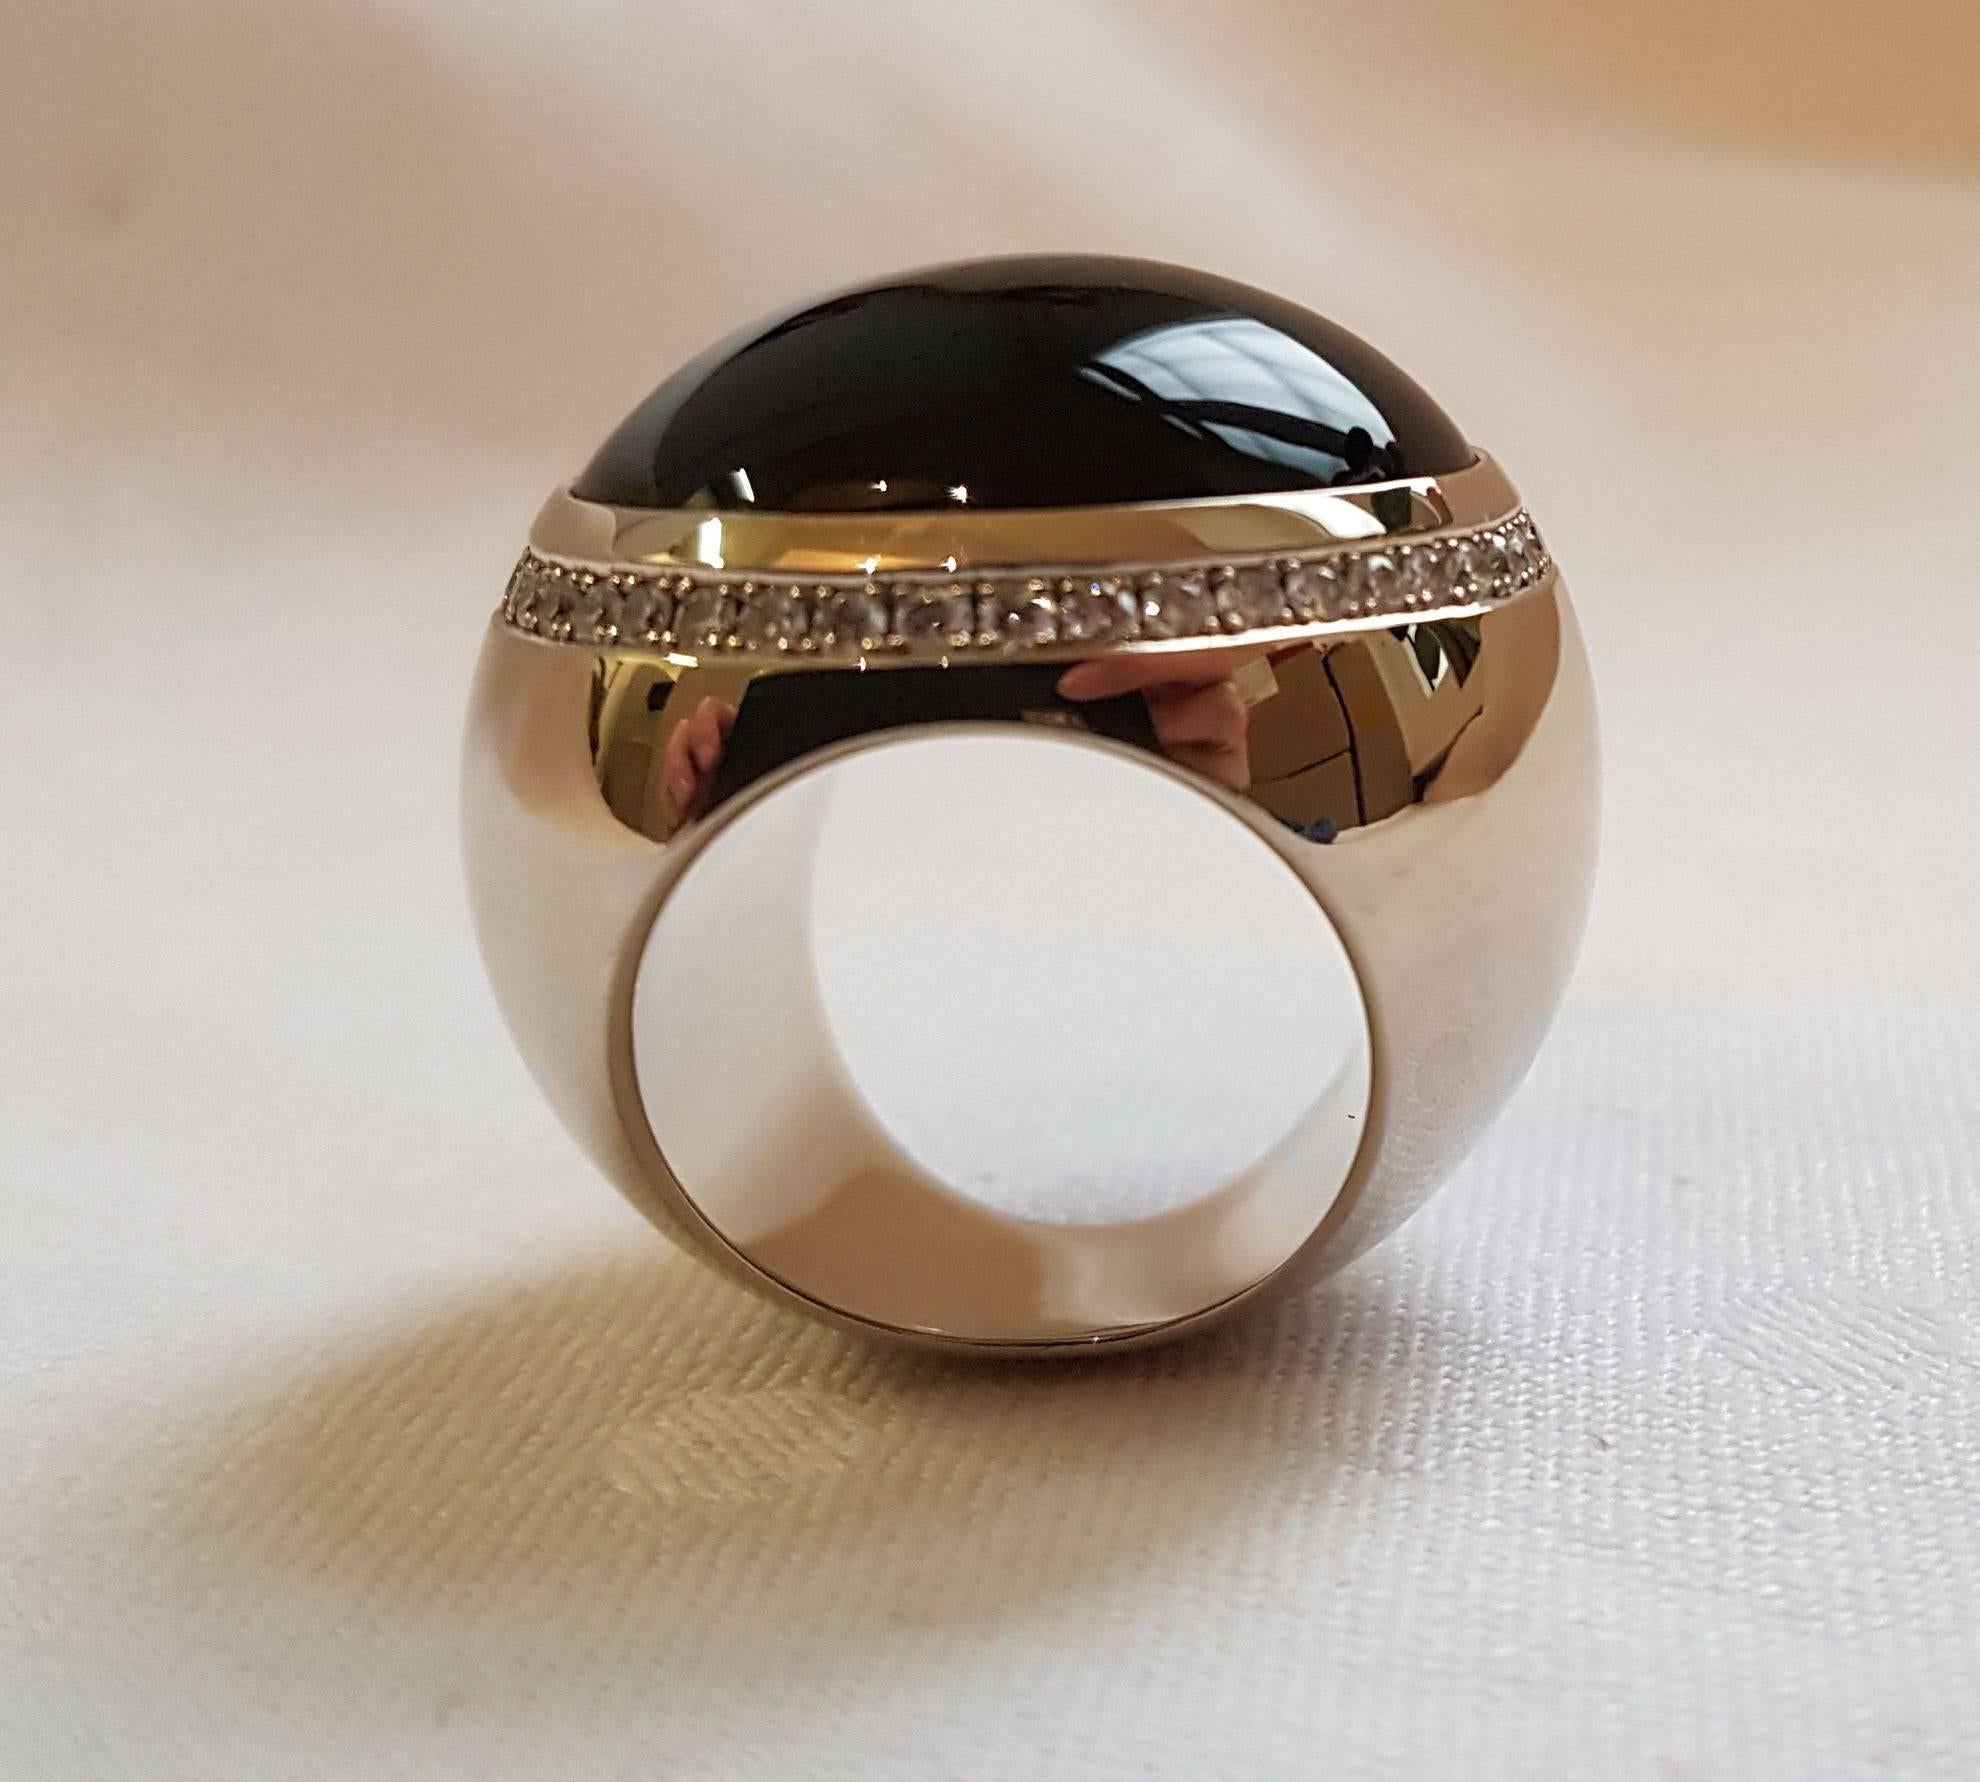 Extravagant design ring made by Wagner Preziosen.
18 carat white gold, onyx cabochon surrounded by 44 diamonds 0.88 carats.
Ring size: 53 (European Size).
A flashy ring for outgoing personalities.